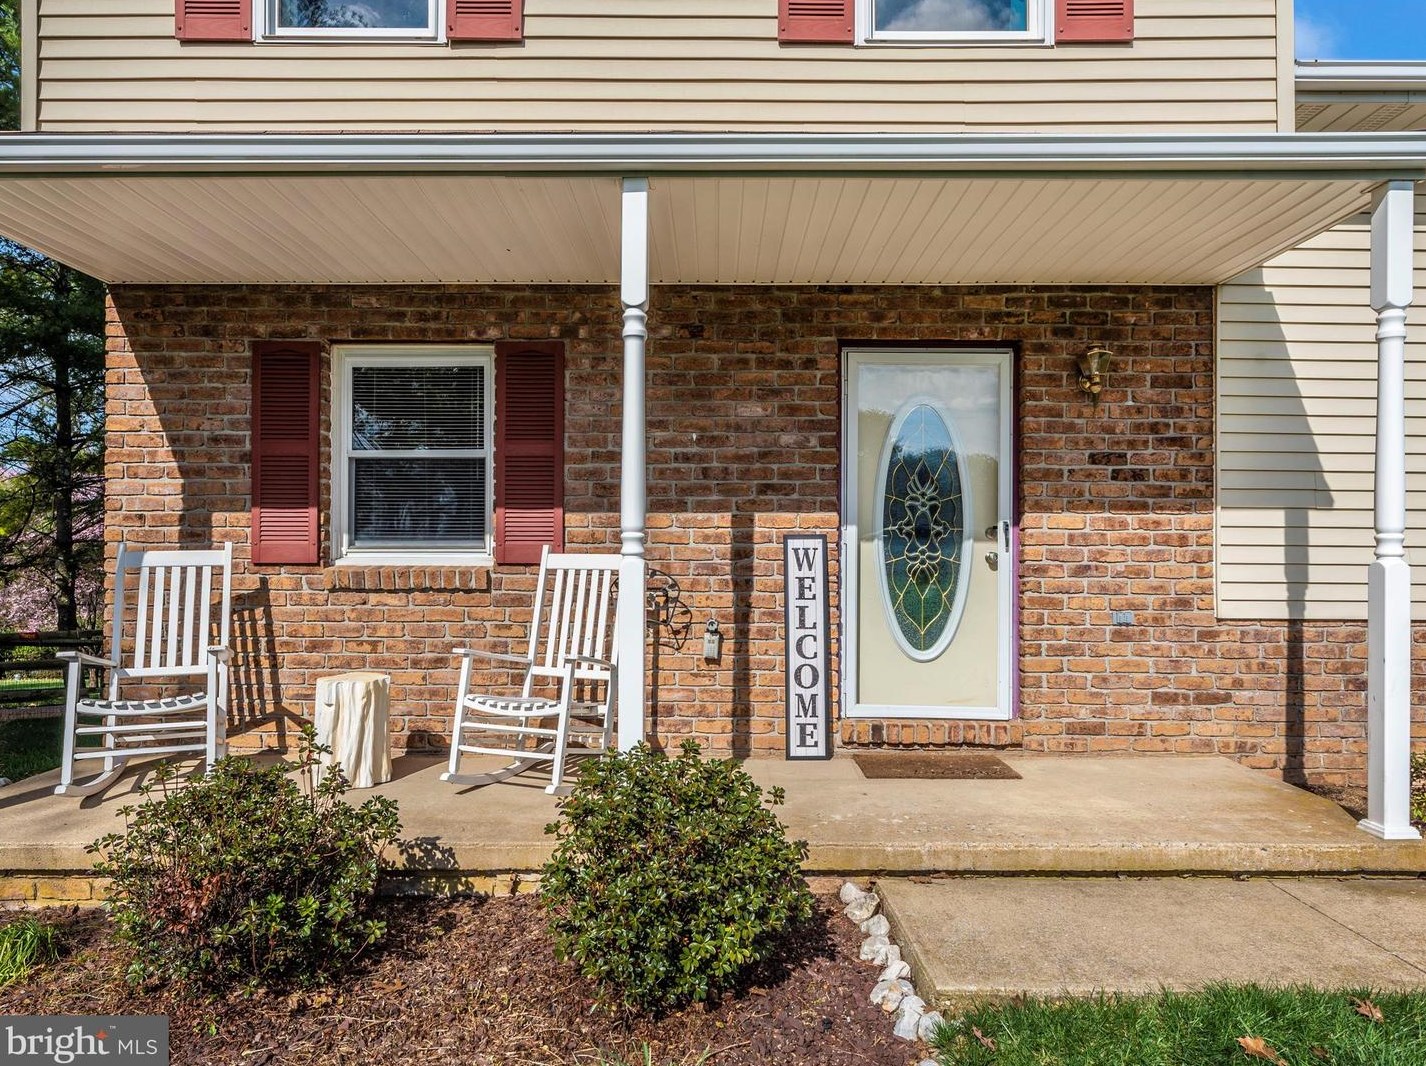 1410 Chazadale Way, Westminster, MD 21157